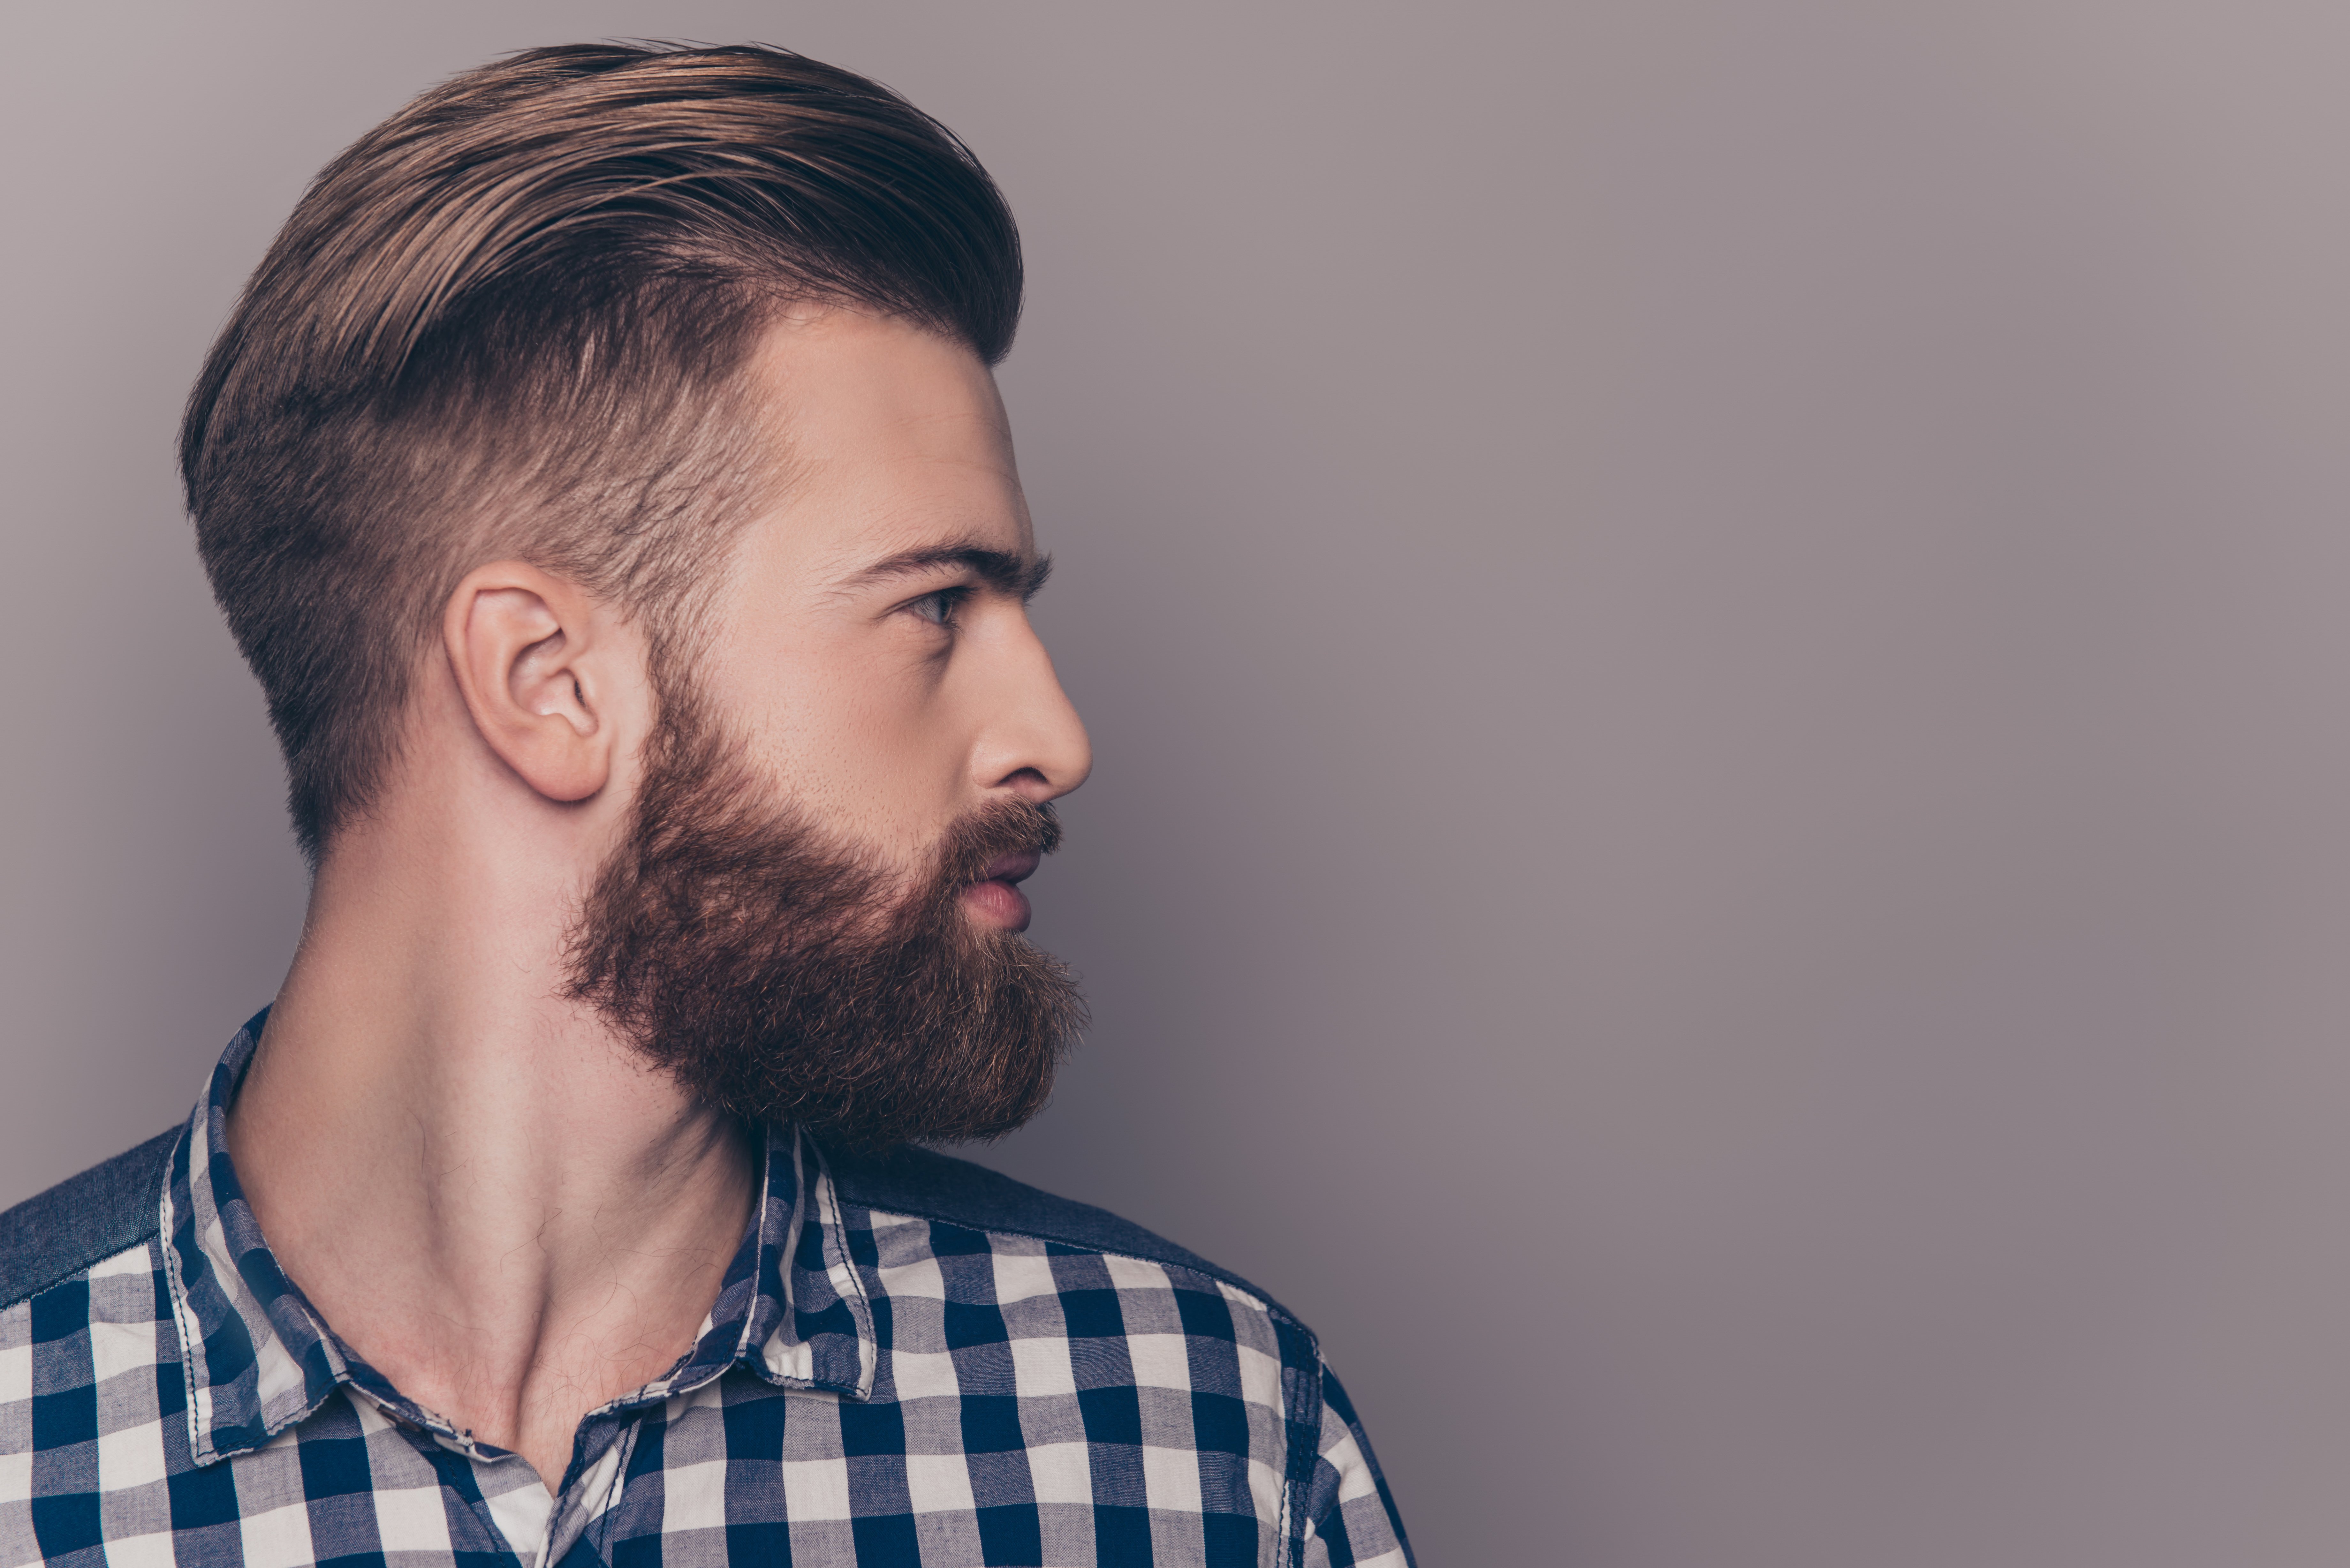 The profile of a man with a beard, wearing a blue plaid t-shirt. | Photo: Shutterstock